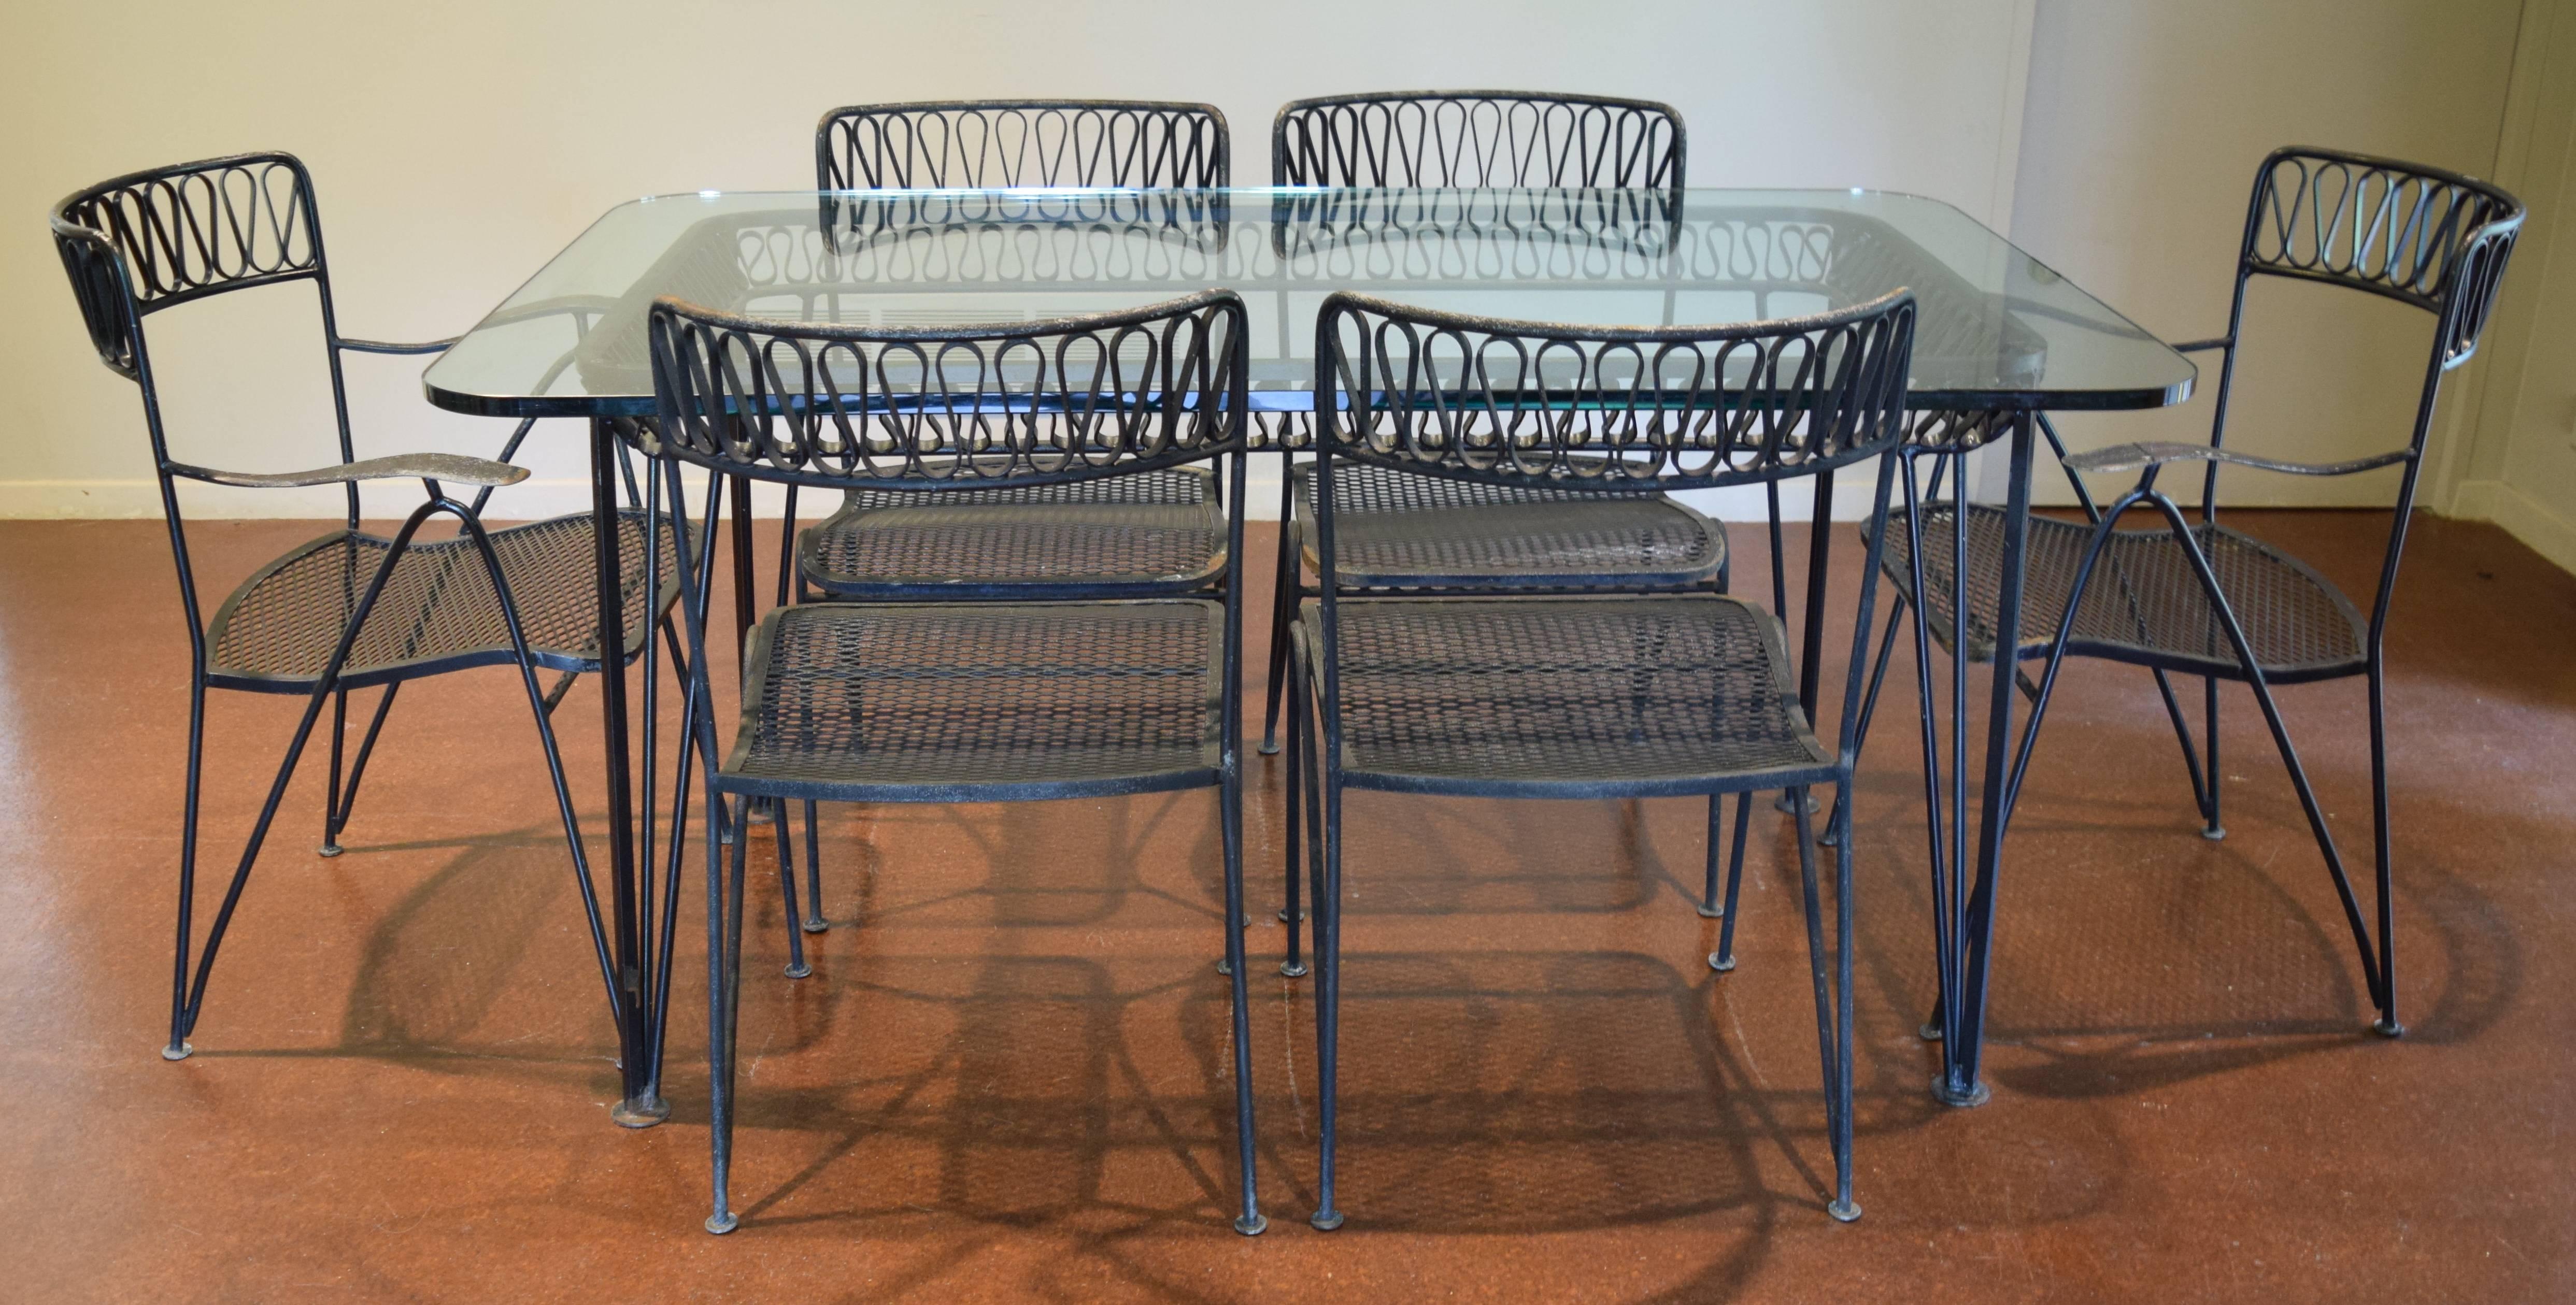 Beautiful seven-piece dining set from the famous ribbon line designed by Tempestini for Salterini. Includes a glass-topped table plus two armchairs and four side chairs. Please note: One side chair needs a simple weld fix (see last photo); we can